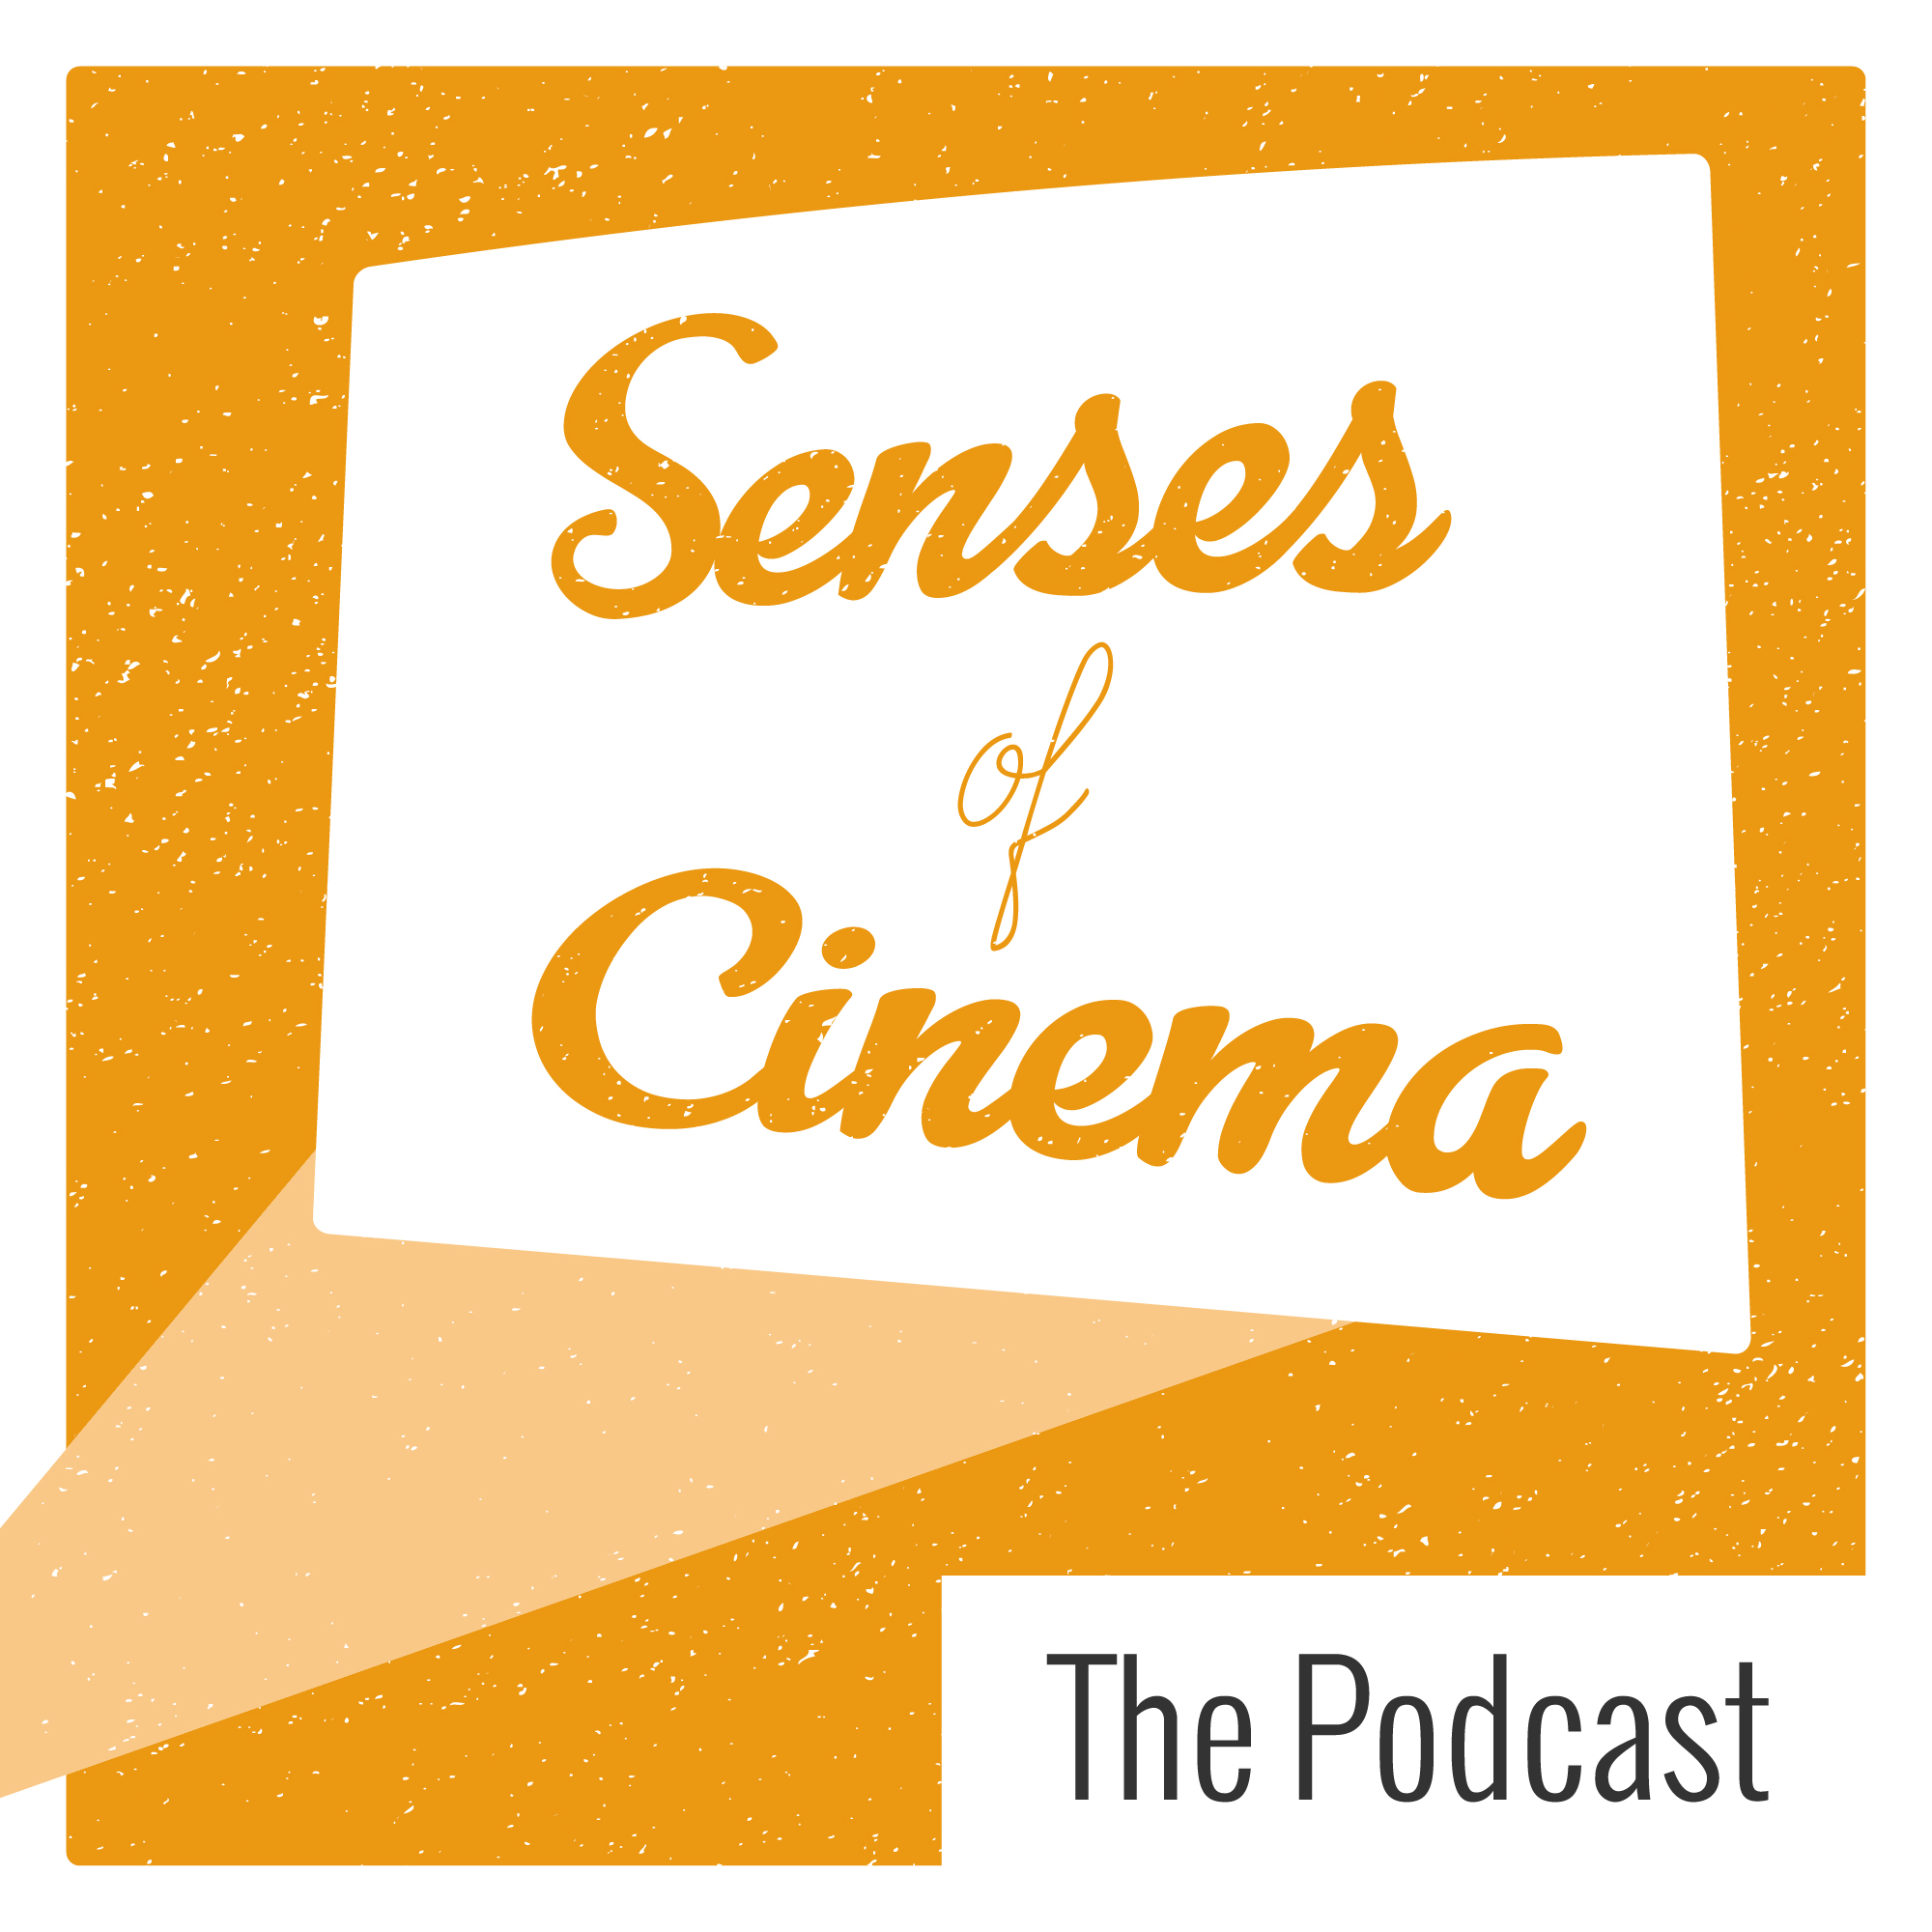 Welcome to the Senses of Cinema Podcast